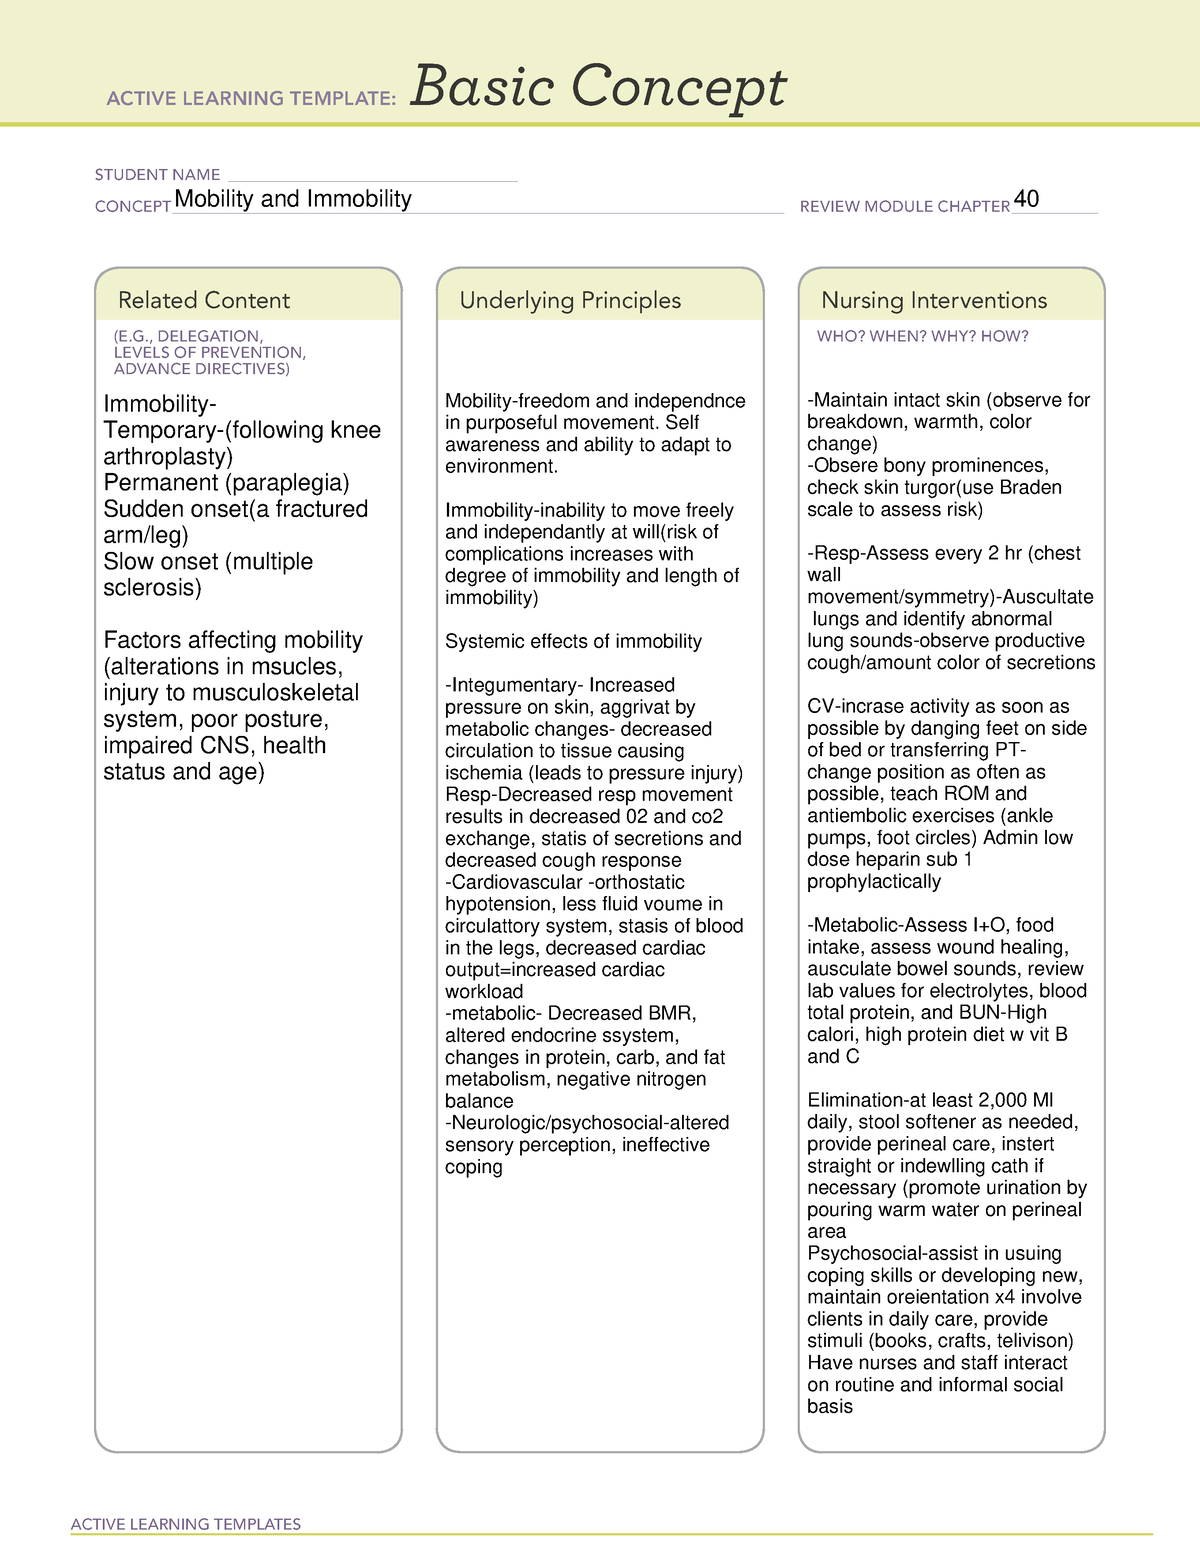 Basic Concept Mobility and Immobility ACTIVE LEARNING TEMPLATES